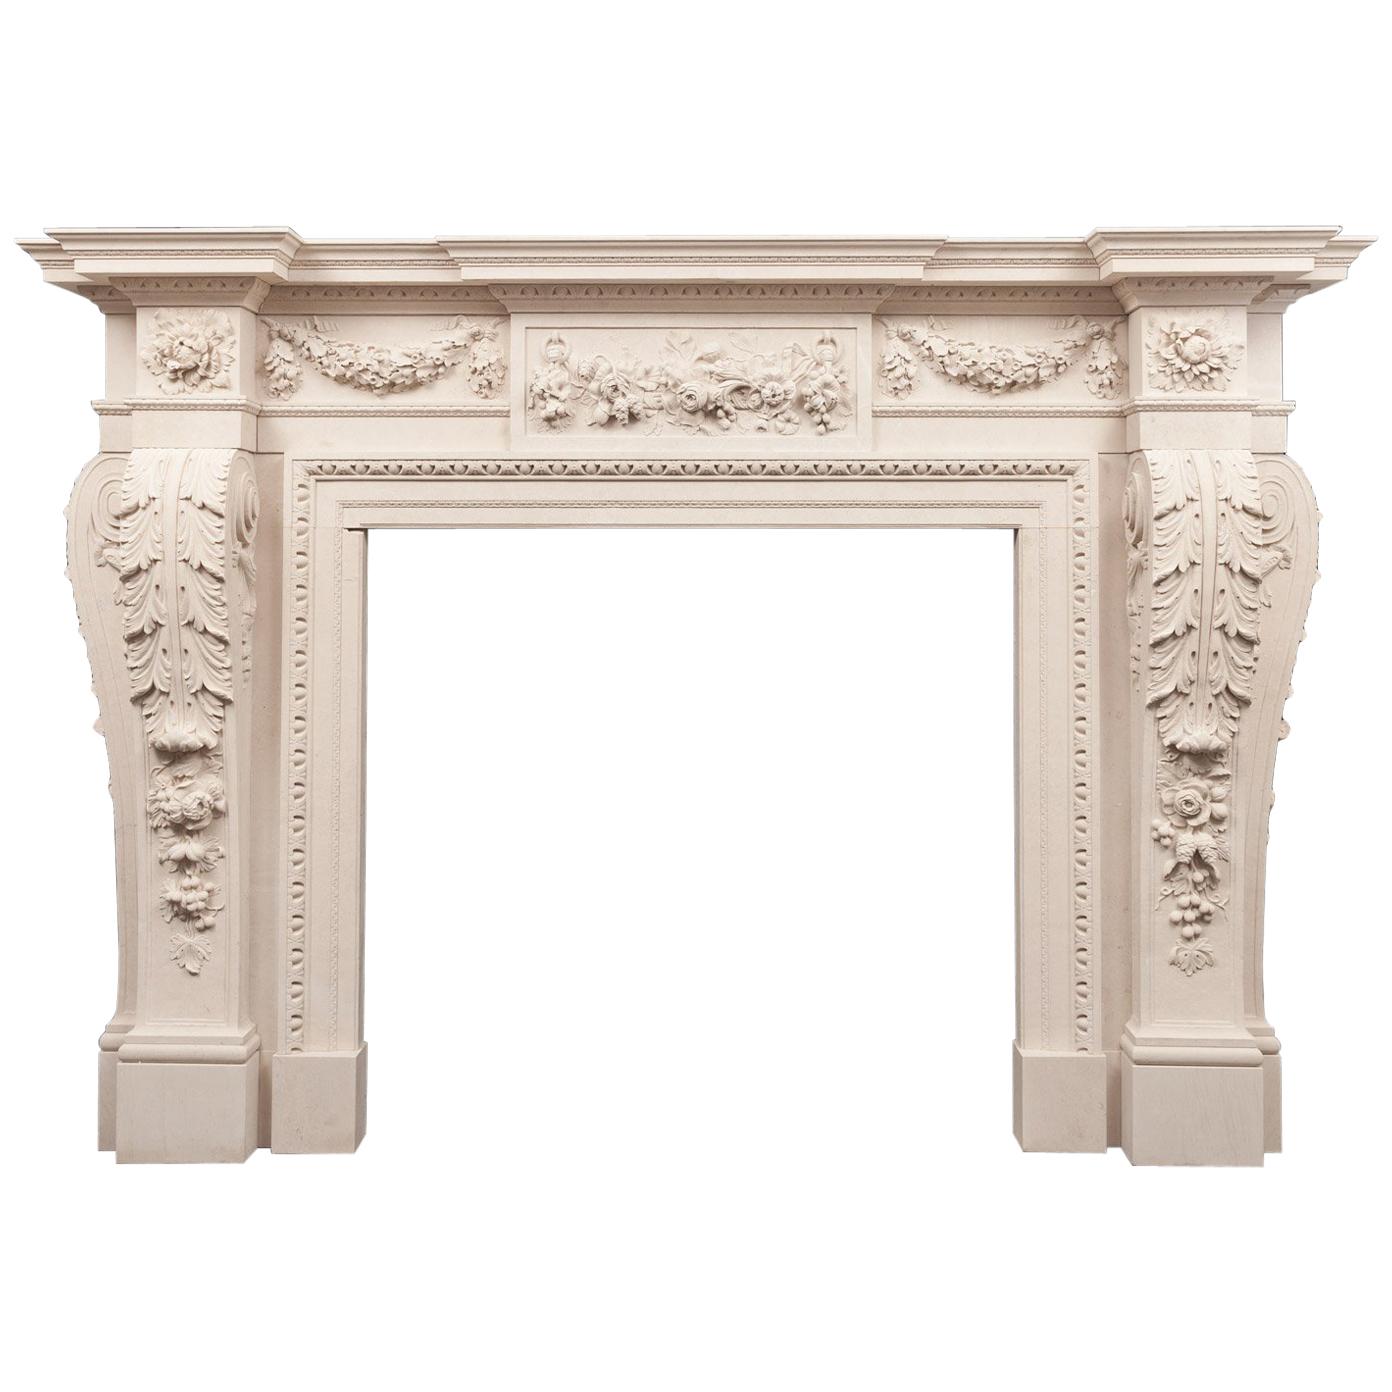 Ryan & Smith Magnificent Stone Fireplace For Sale